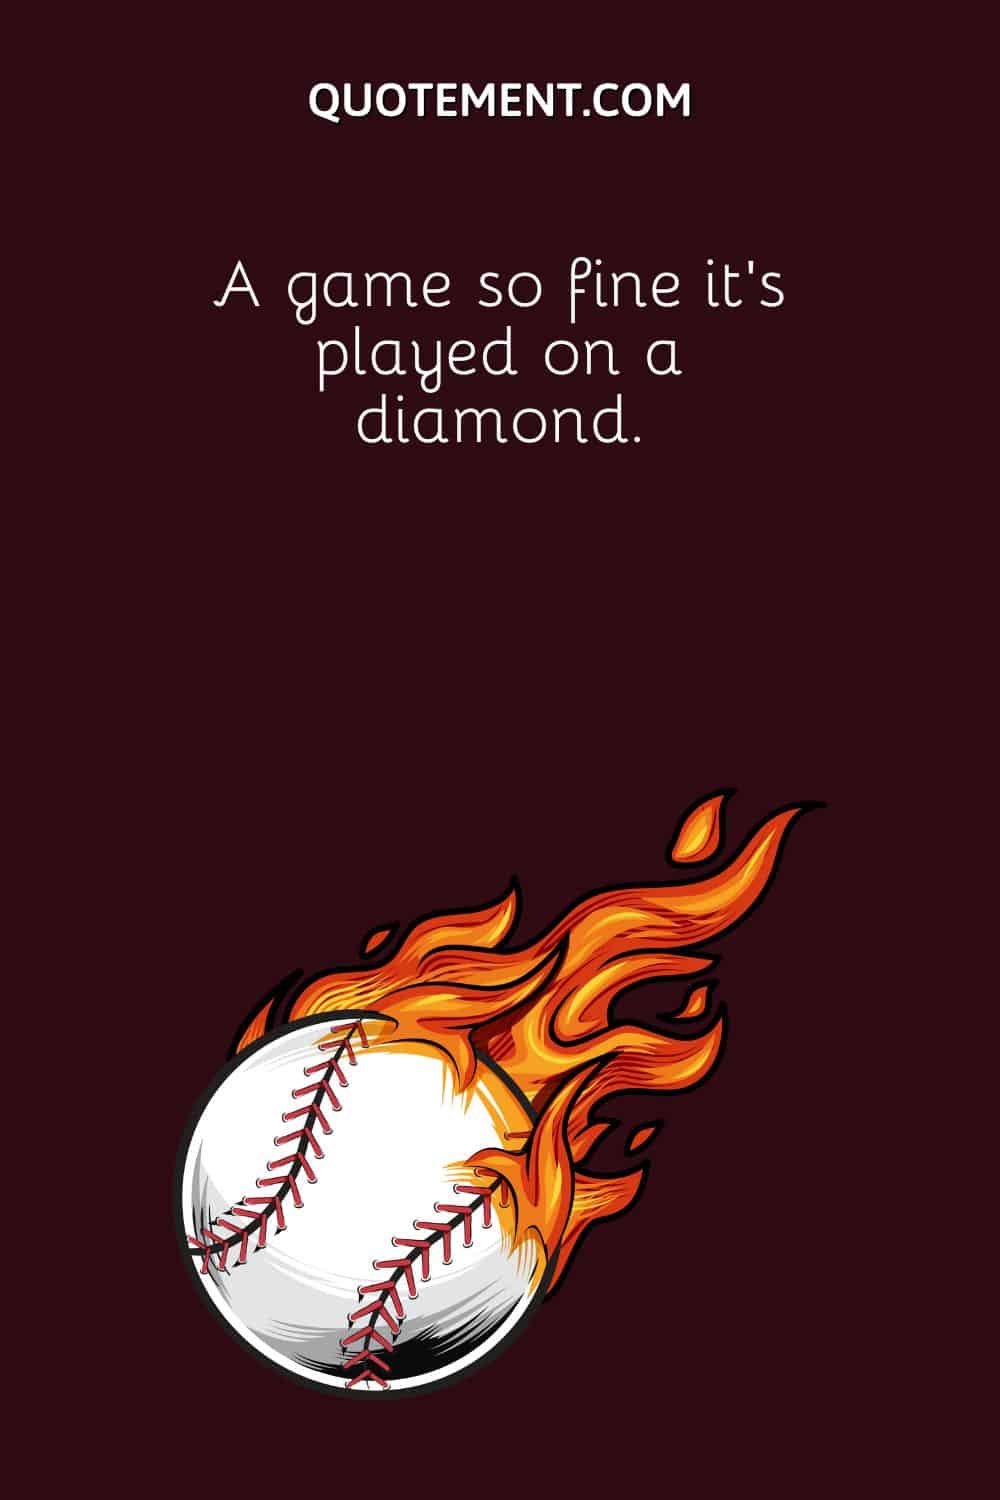 A game so fine it’s played on a diamond